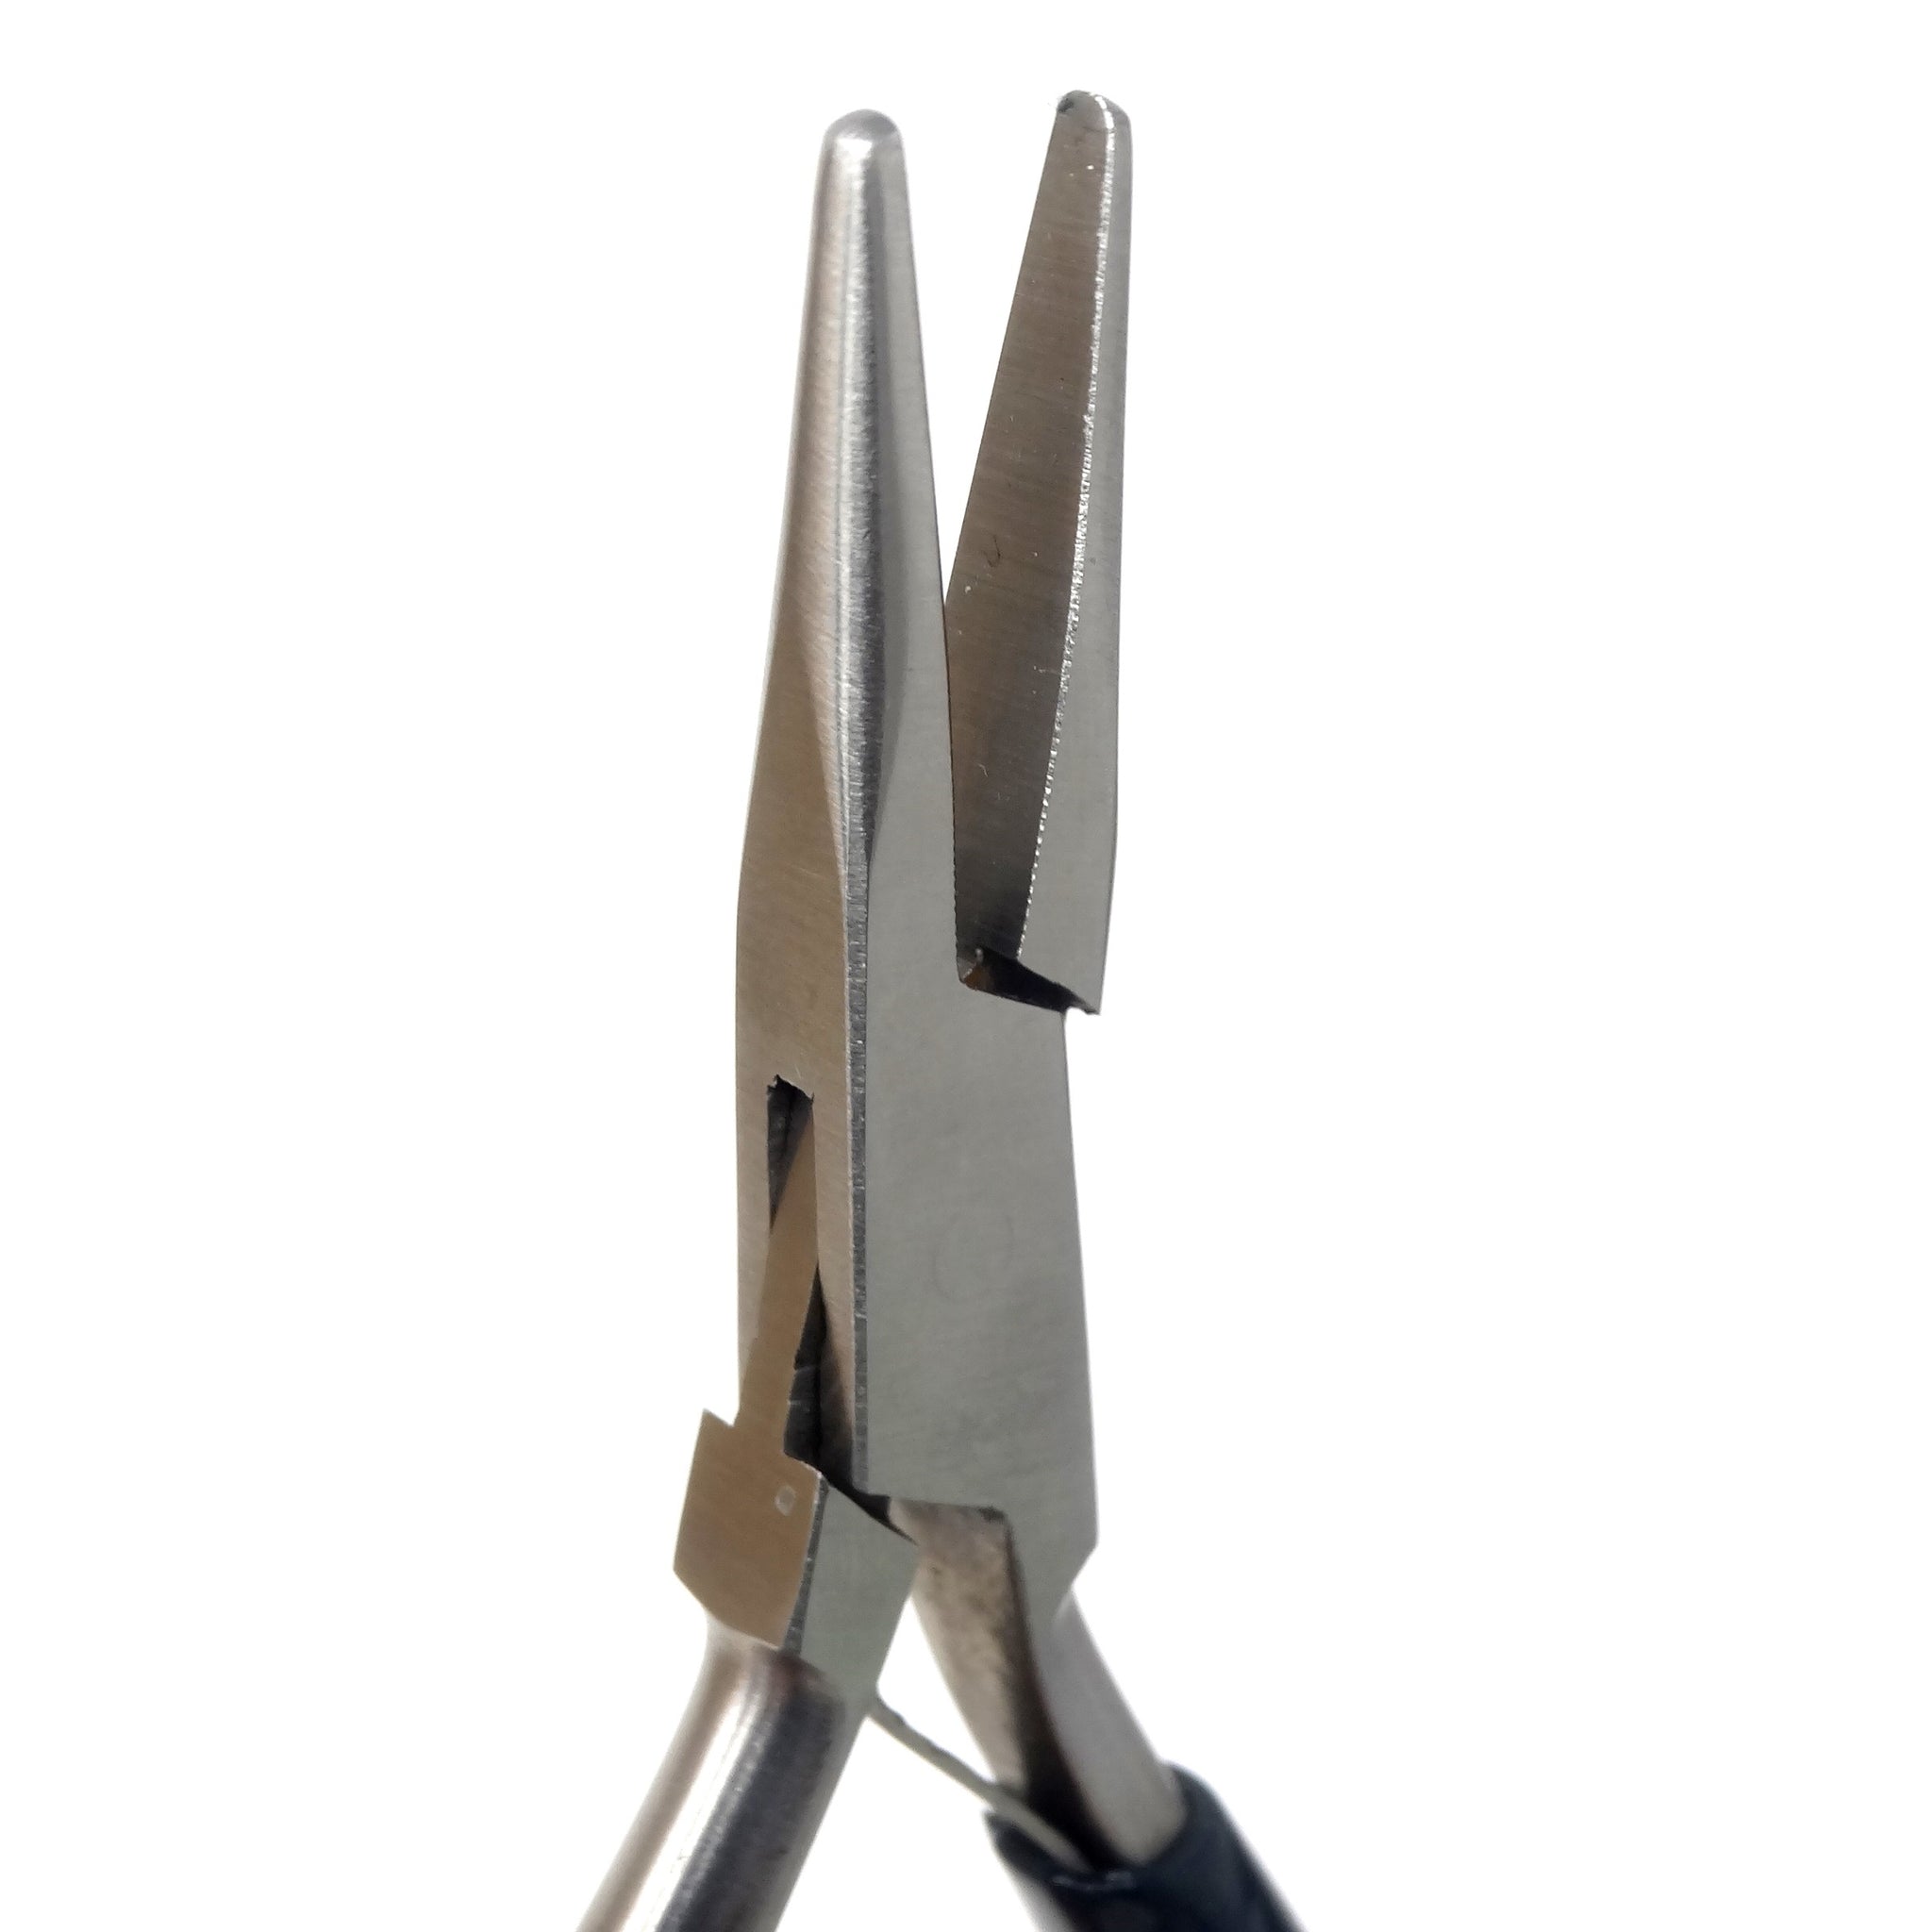 A to Z Nylon Flat/Round Nose Pliers – A to Z Jewelry Tools & Supplies